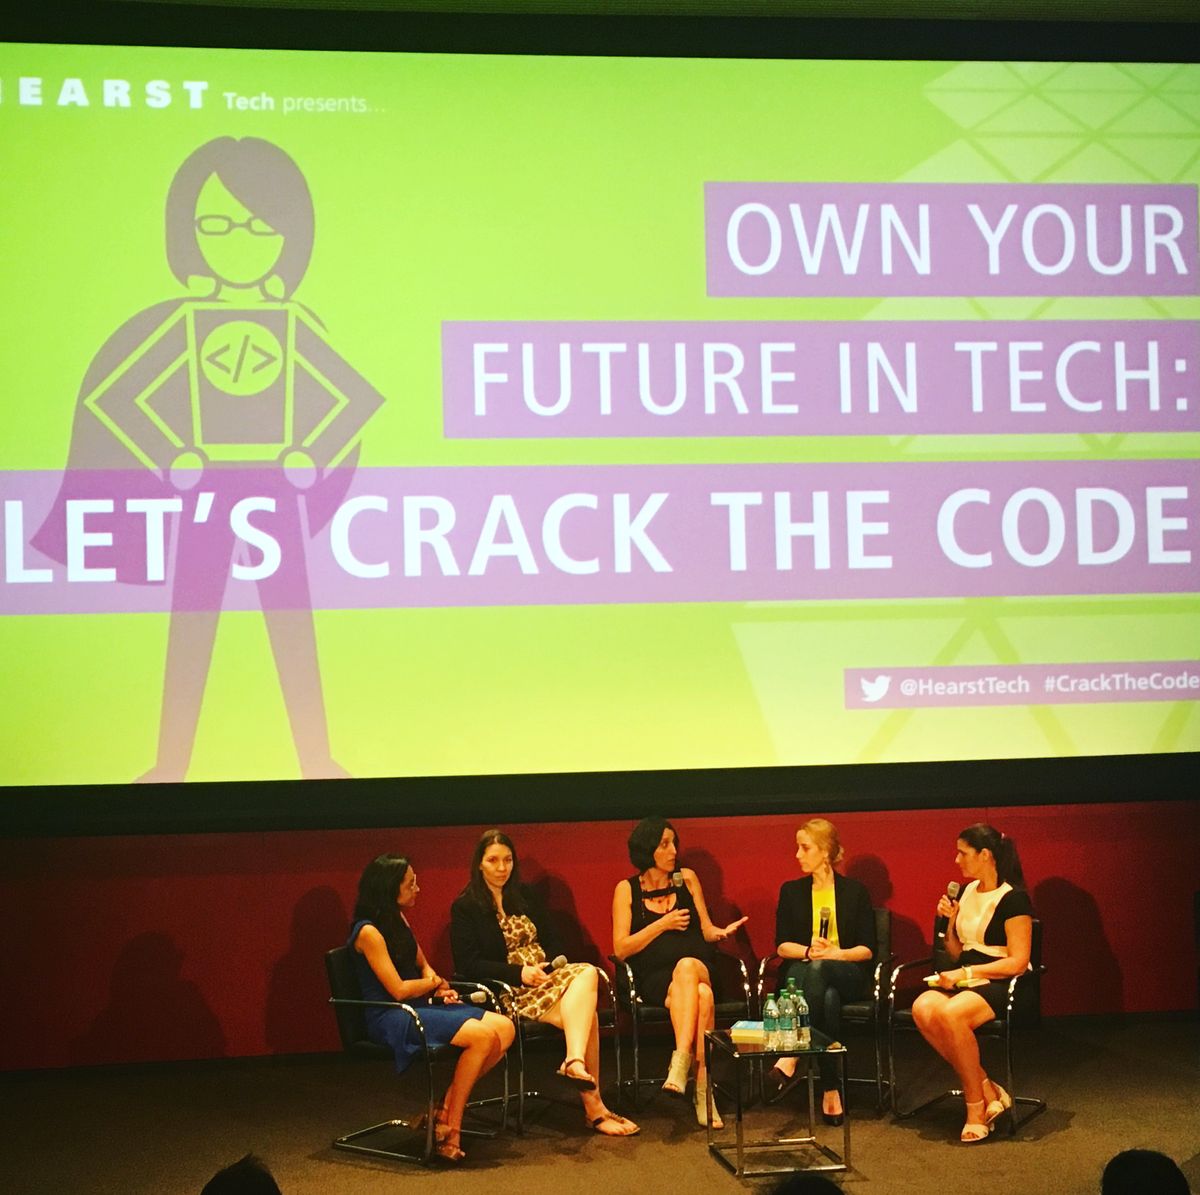 Overheard Inspiration at "Own Your Future In Tech: Let’s Crack the Code"